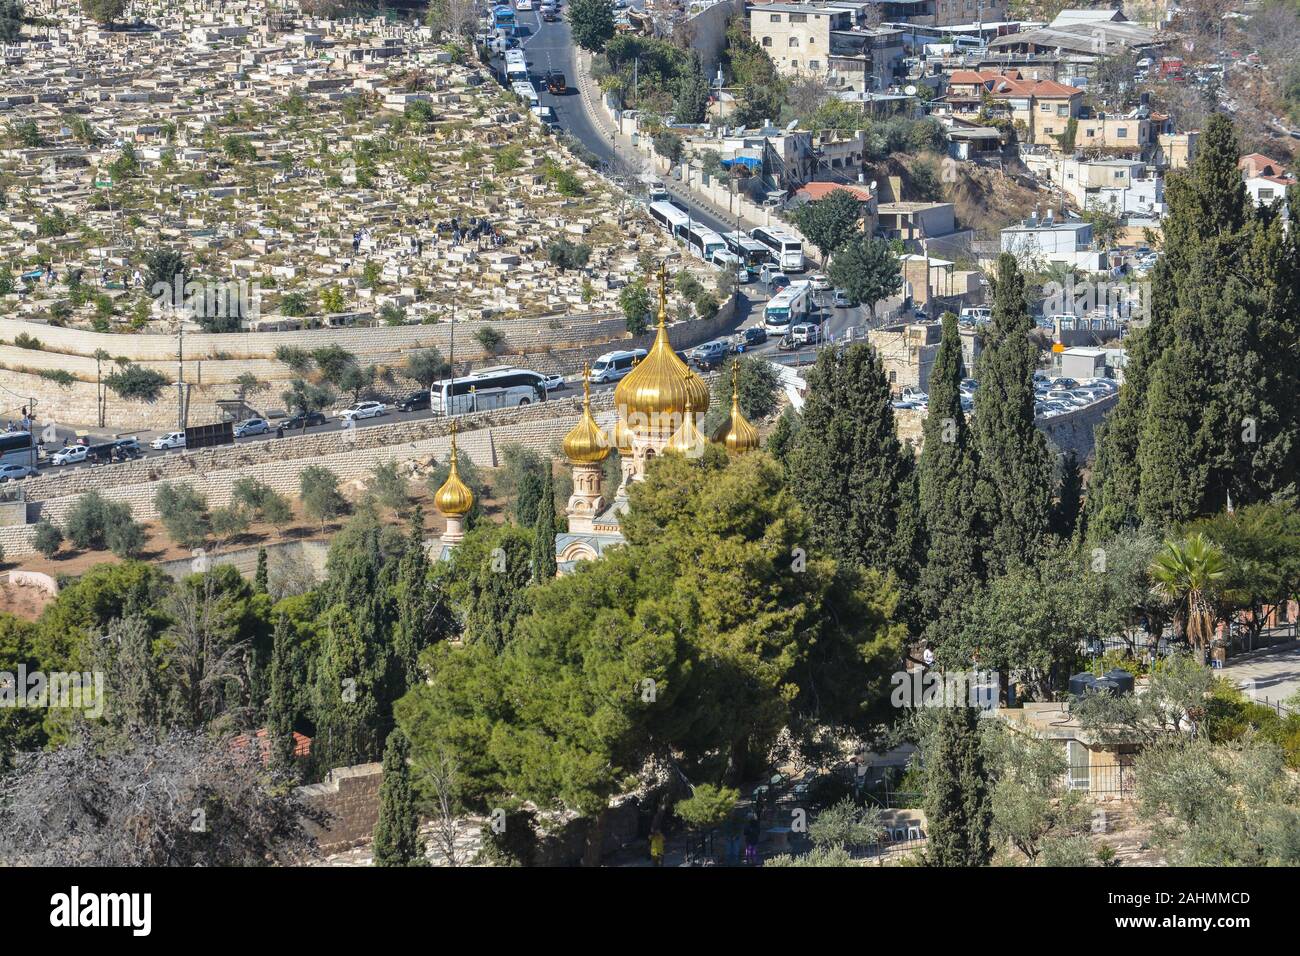 Church of St. Mary Magdalene in Gethsemane. The main church of the Gethsemane convent of Bethany community of the Resurrection of Christ, Jerusalem, I Stock Photo